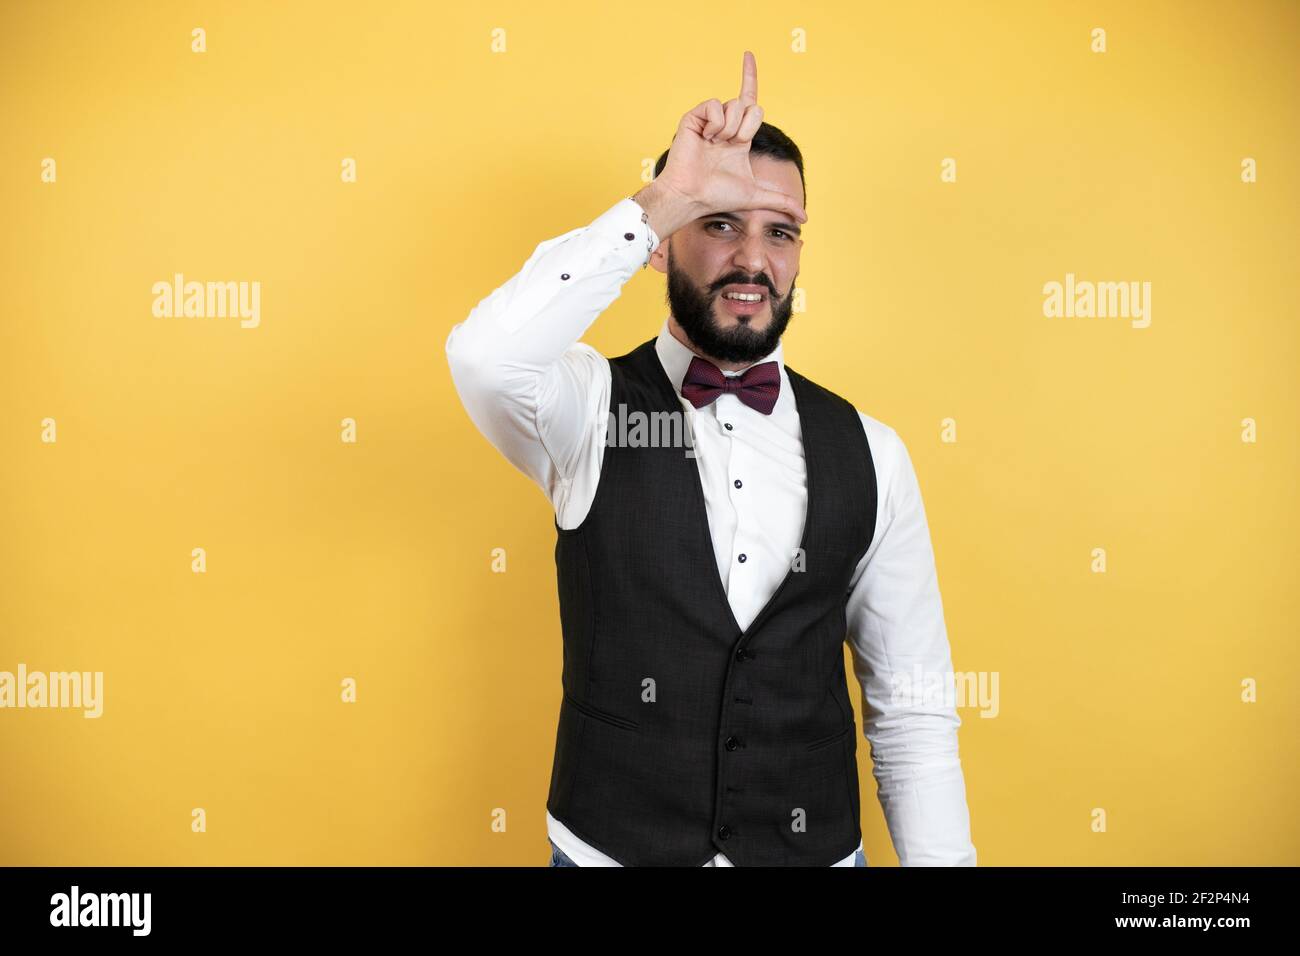 Young man with beard wearing bow tie and vest making fun of people with fingers on forehead doing loser gesture mocking and insulting. Stock Photo